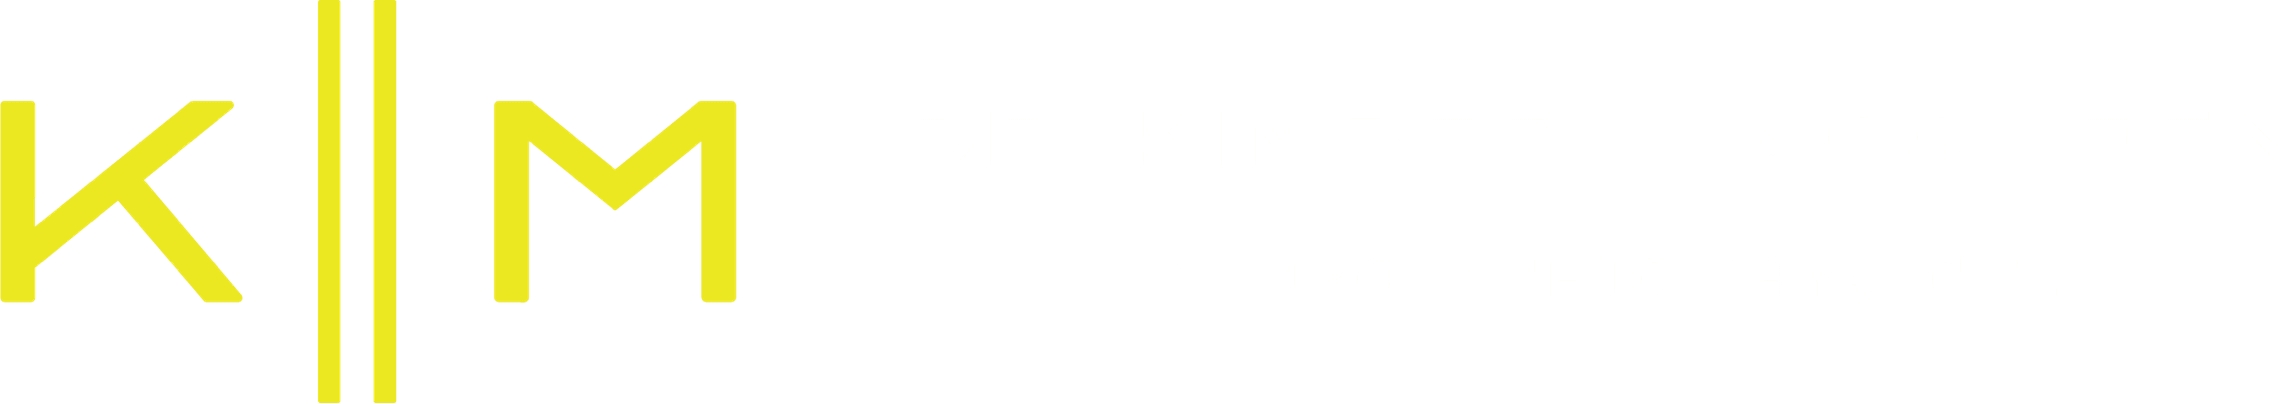 Dr. Kimberly McQueen